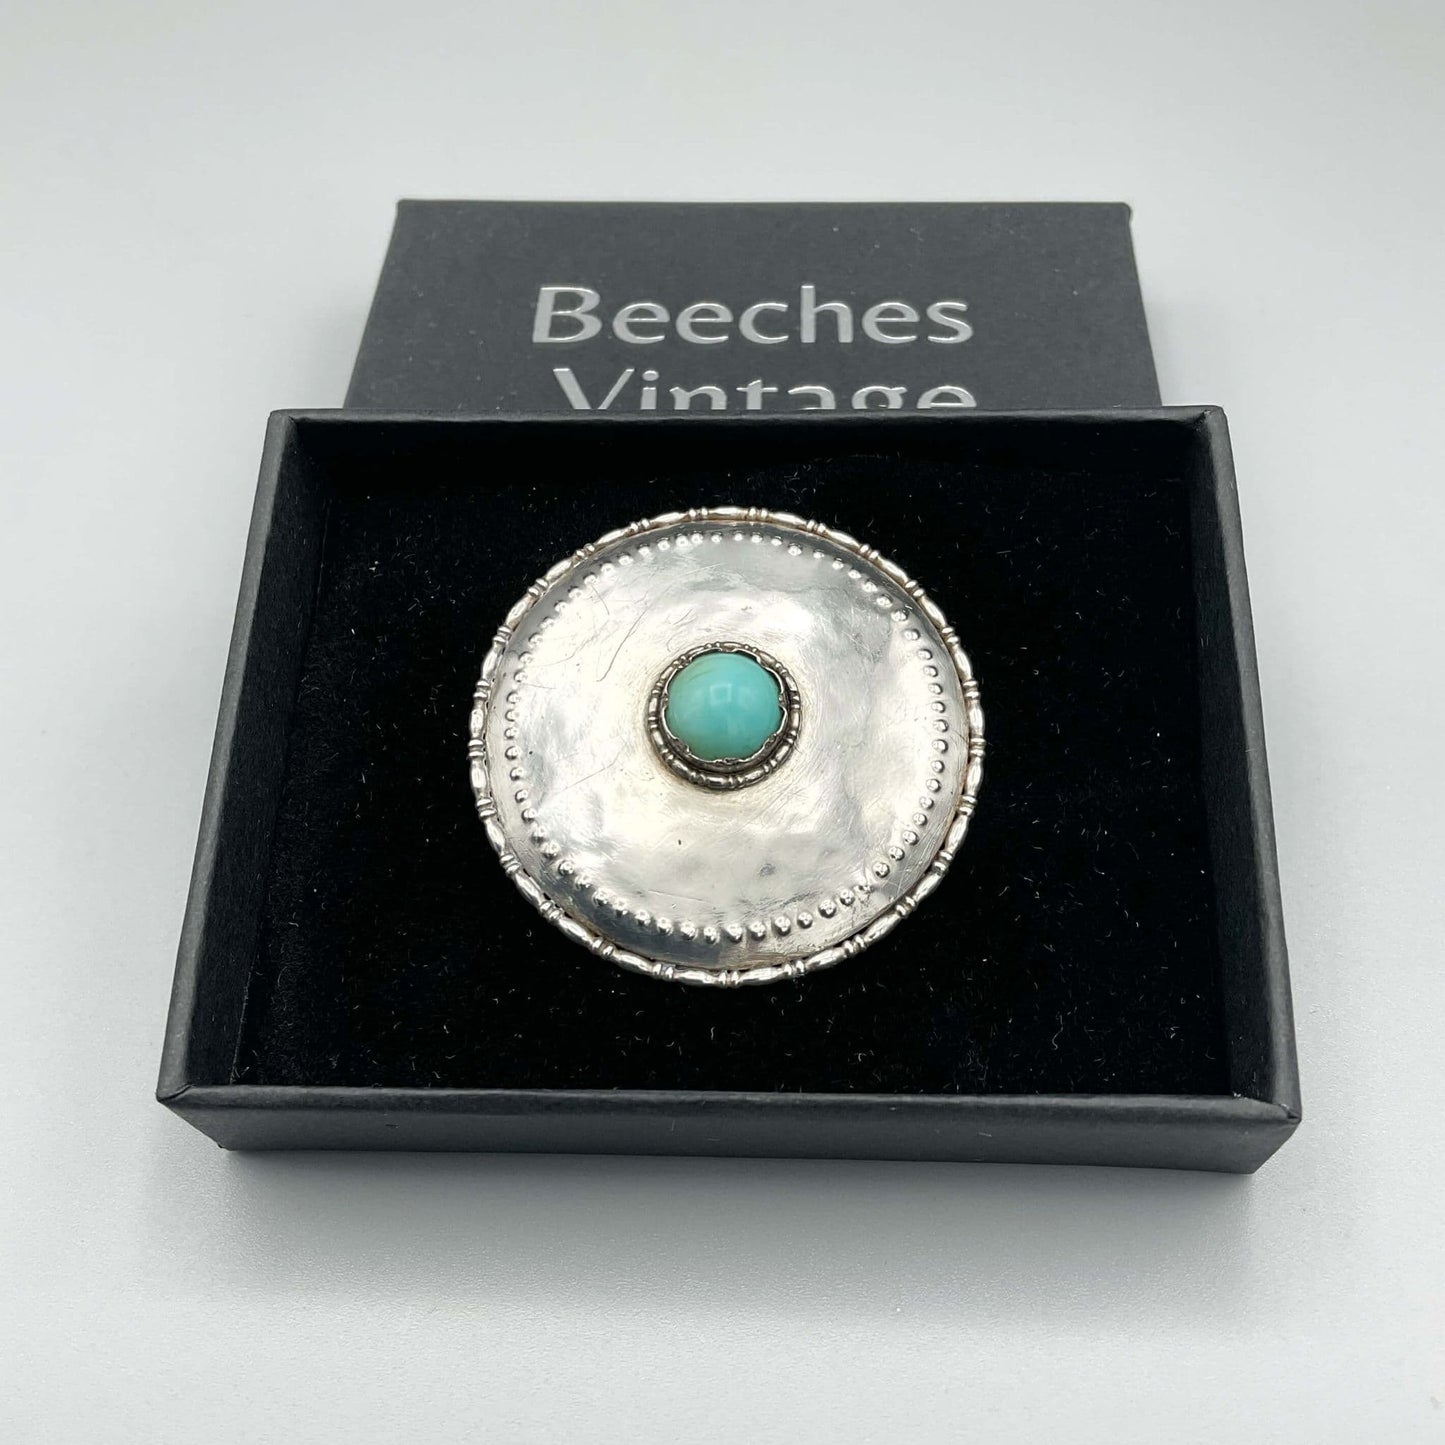 Antique Turquoise Shield Brooch